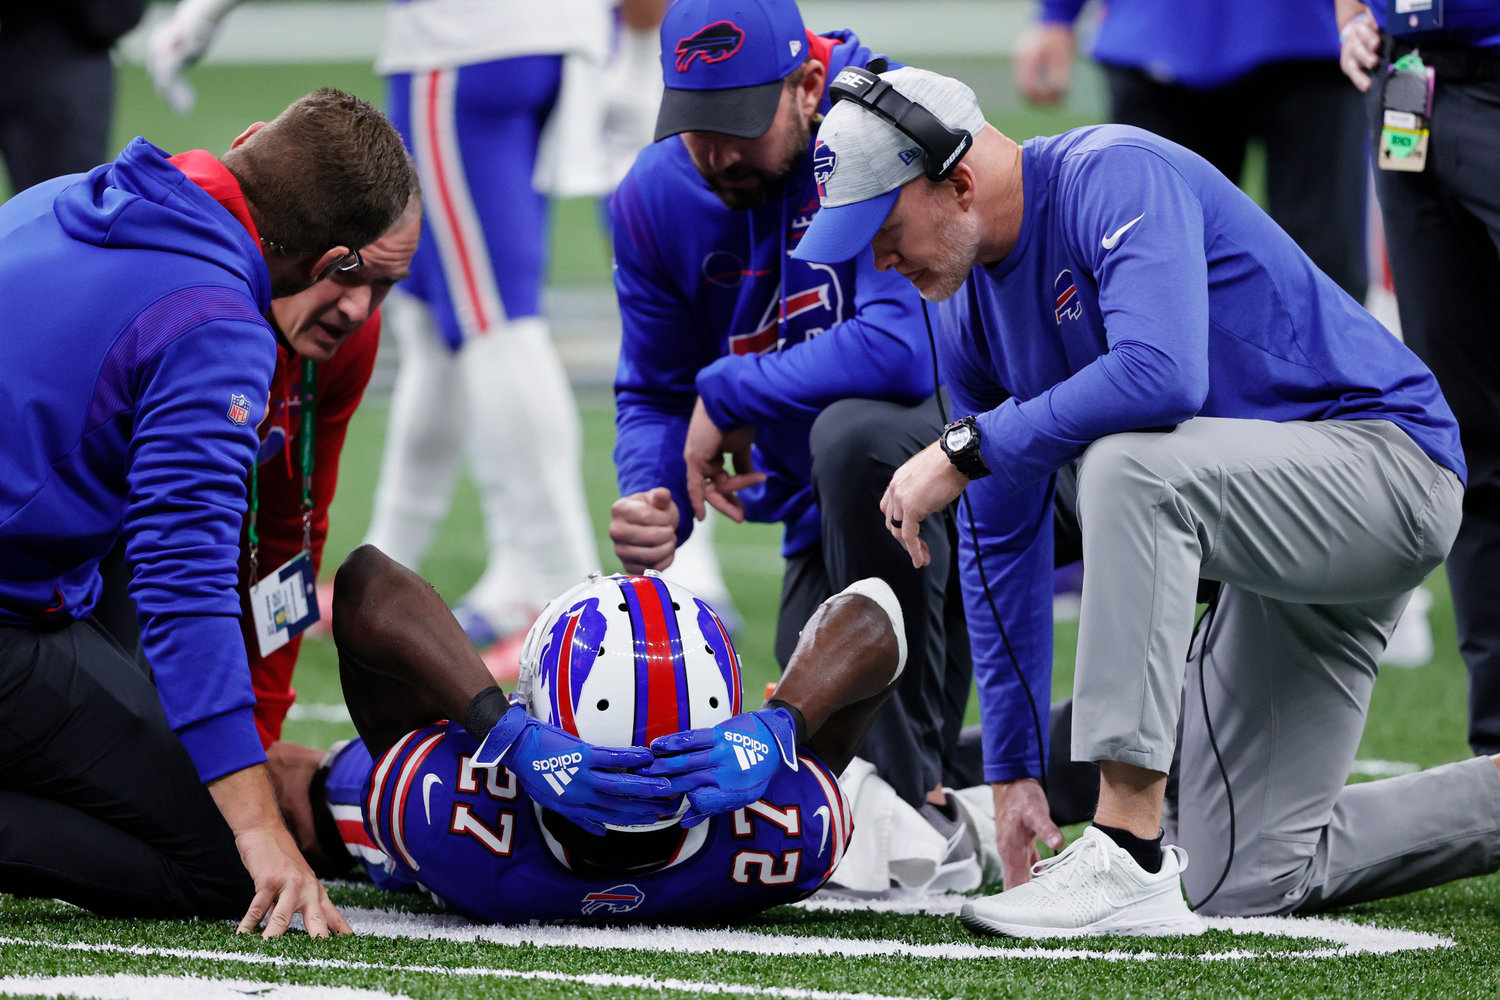 OUT FOR THE SEASON — Injured Buffalo Bills cornerback Tre’Davious White (27) is helped by head coach Sean McDermott, right, and medical staff in the first half of an NFL game against the New Orleans Saints in New Orleans, Thursday, Nov. 25. The Bills confirmed that White tore his ACL and will be out for the remainder of the season.